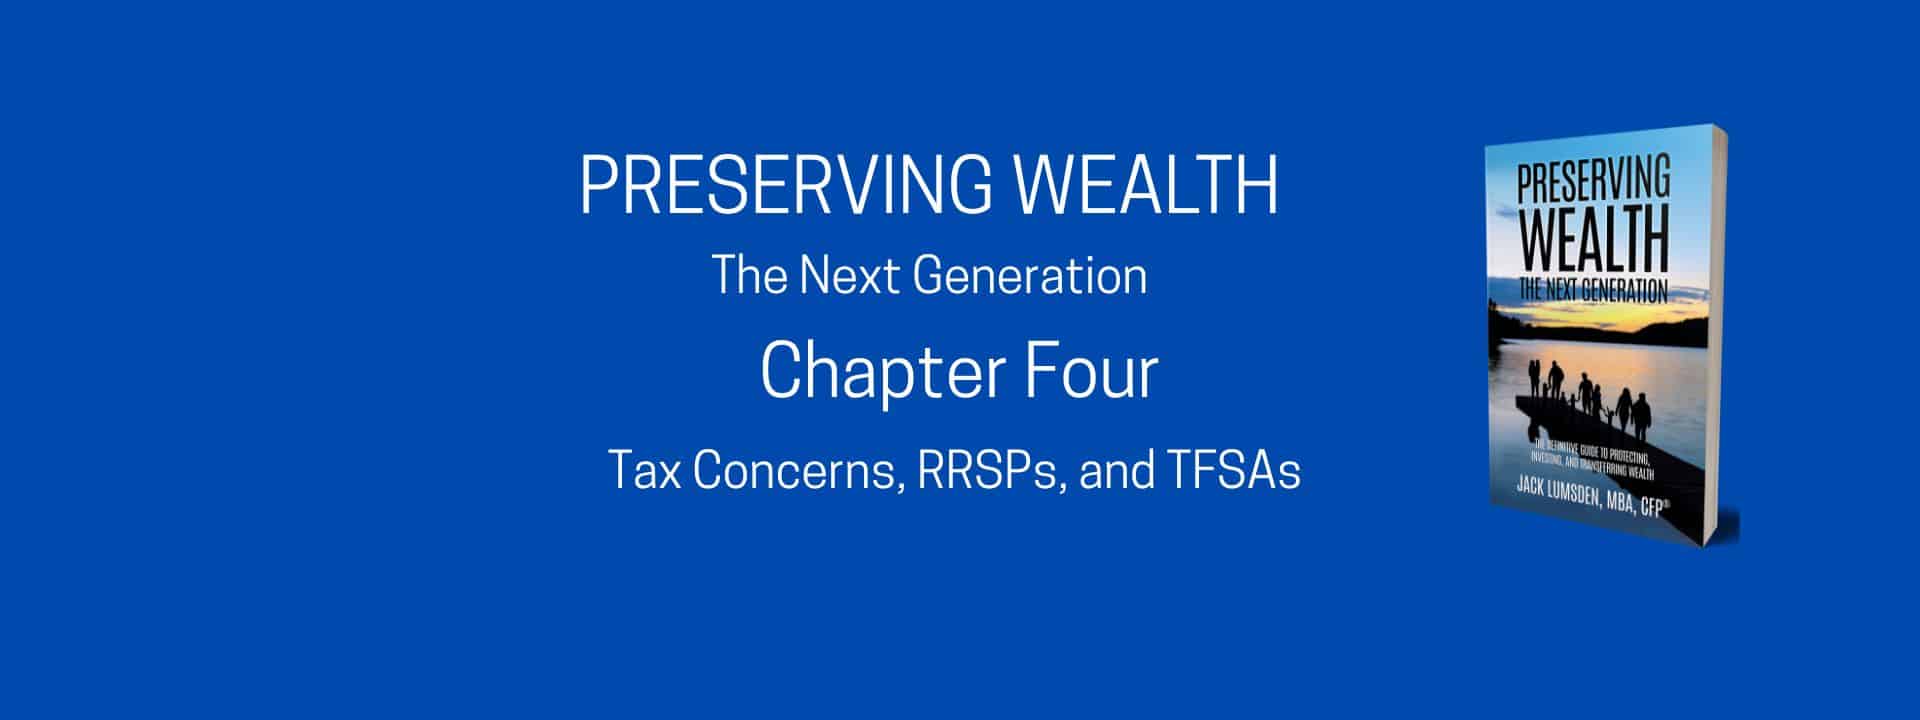 Chapter Four of Preserving Wealth The Next Generation